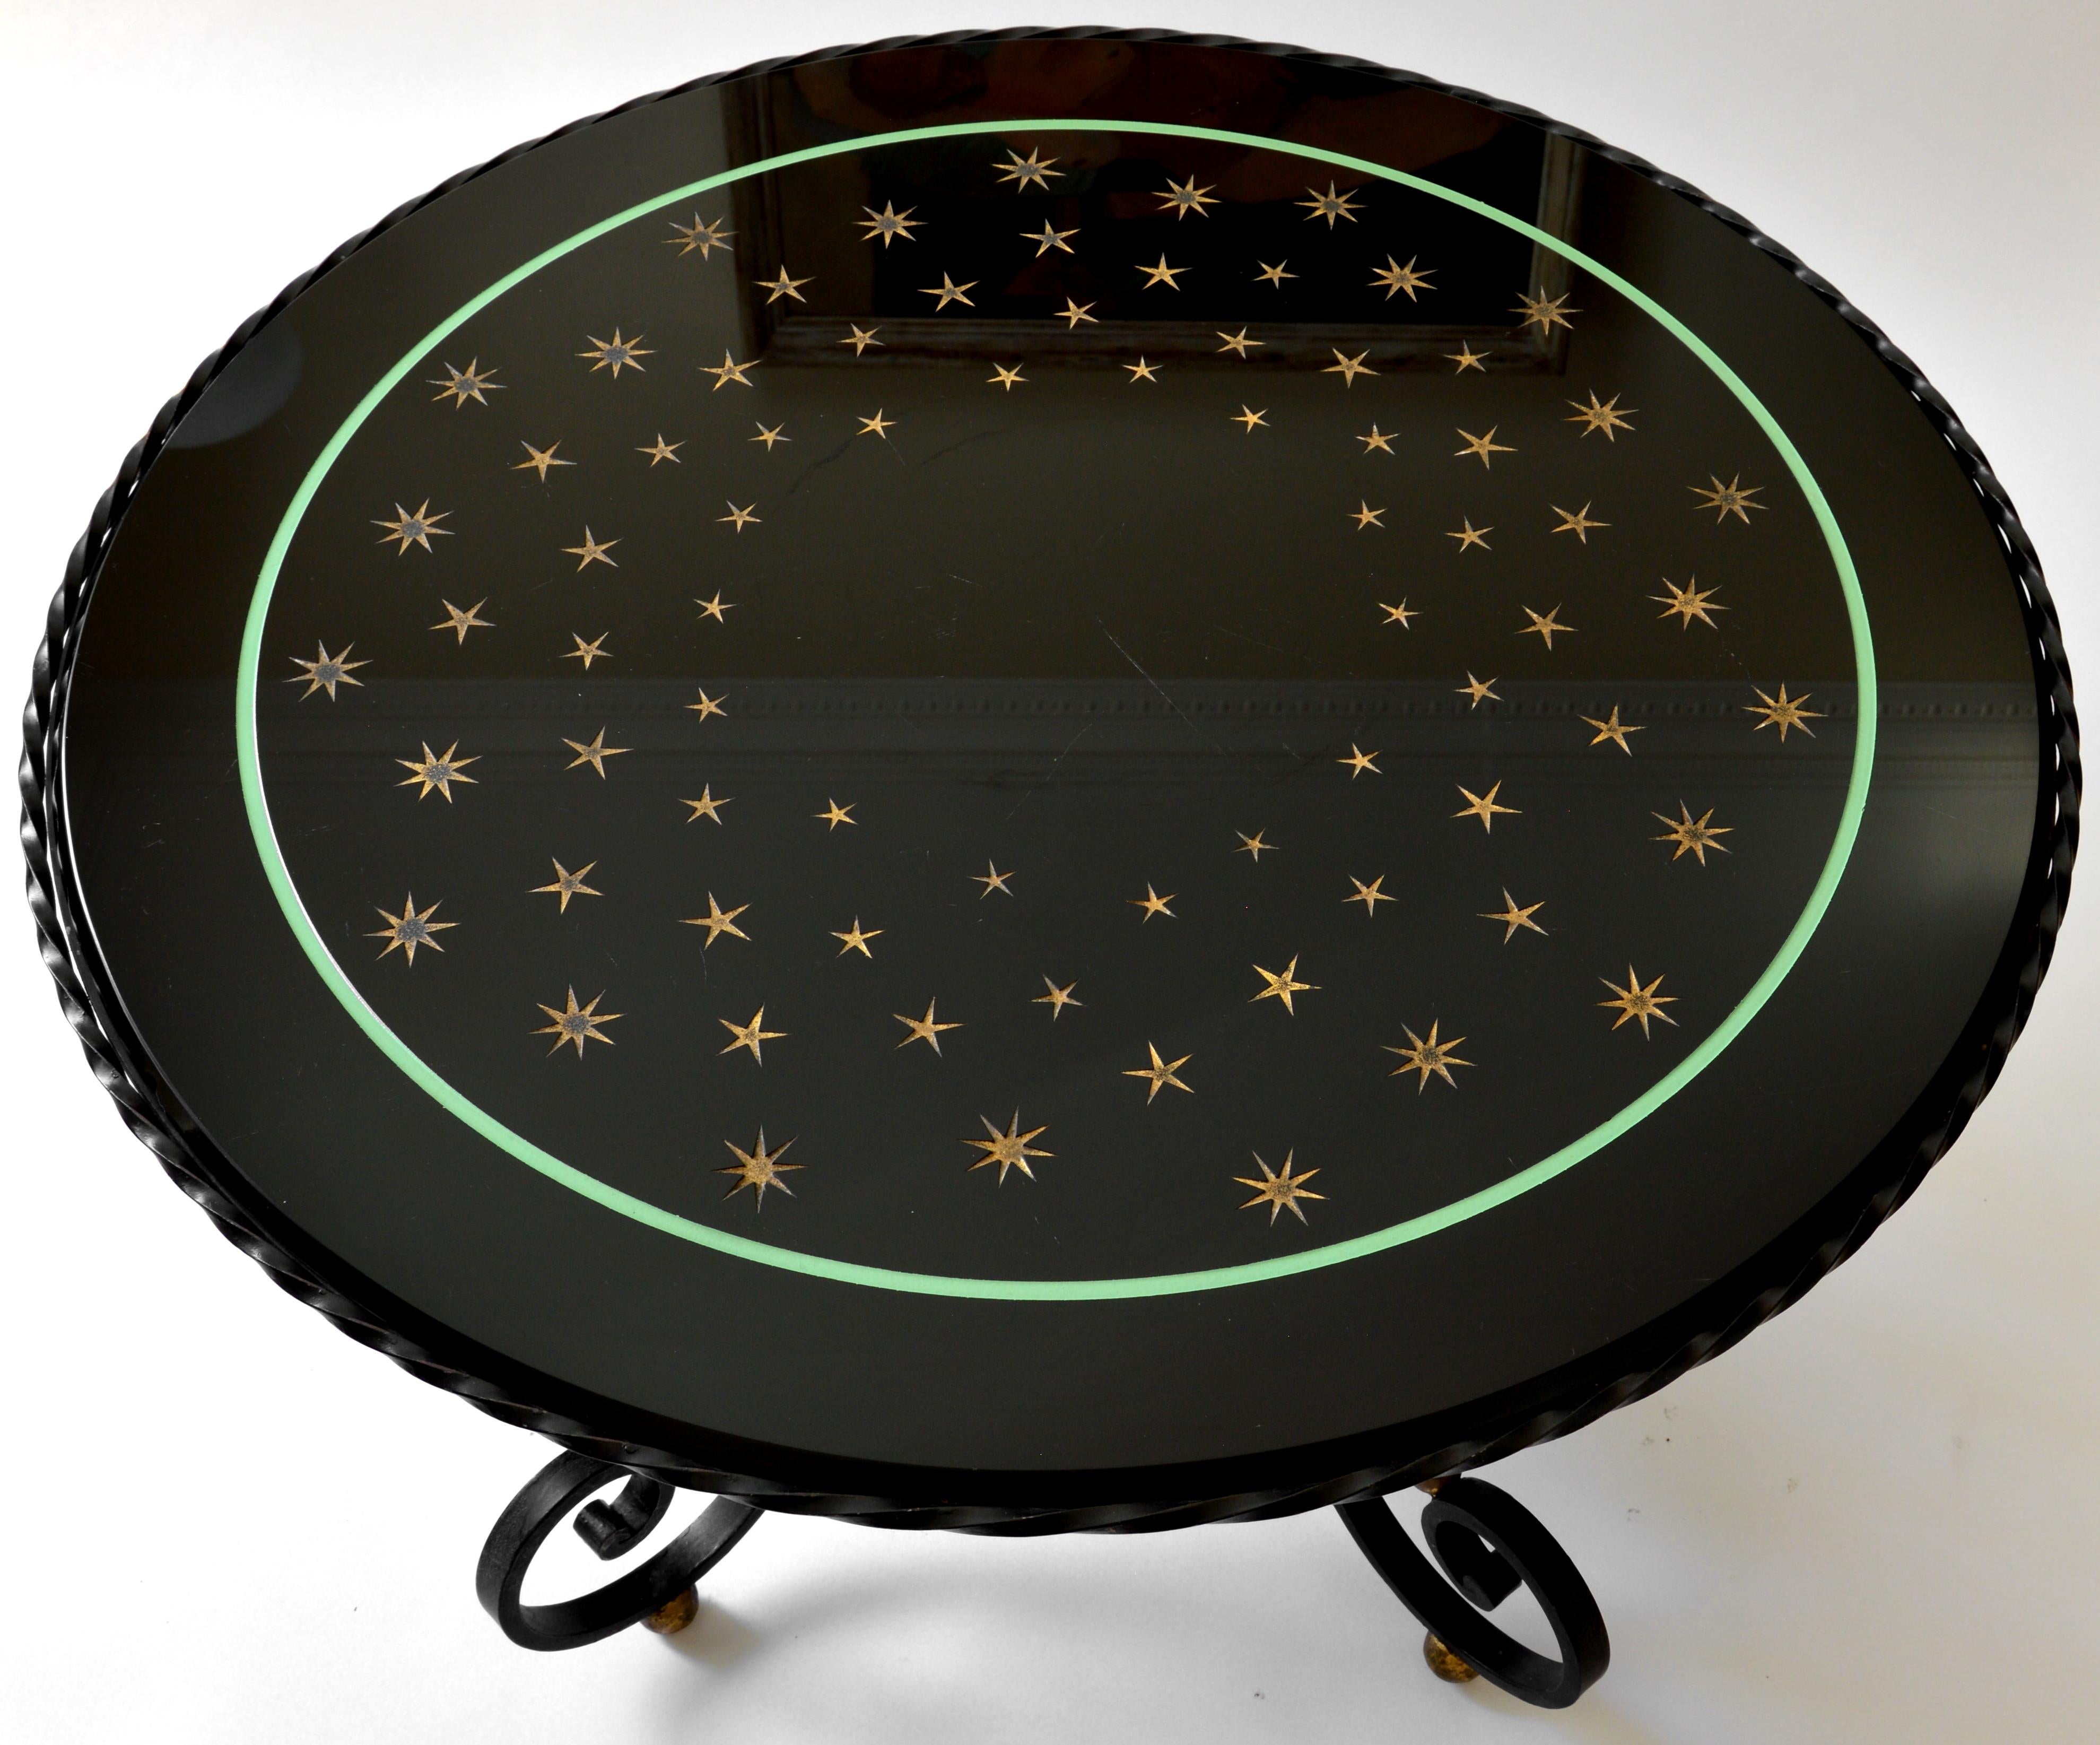 French Art Deco Wrought-Iron & Etched Glass Milky Way Coffee Table, Late 1930s For Sale 2